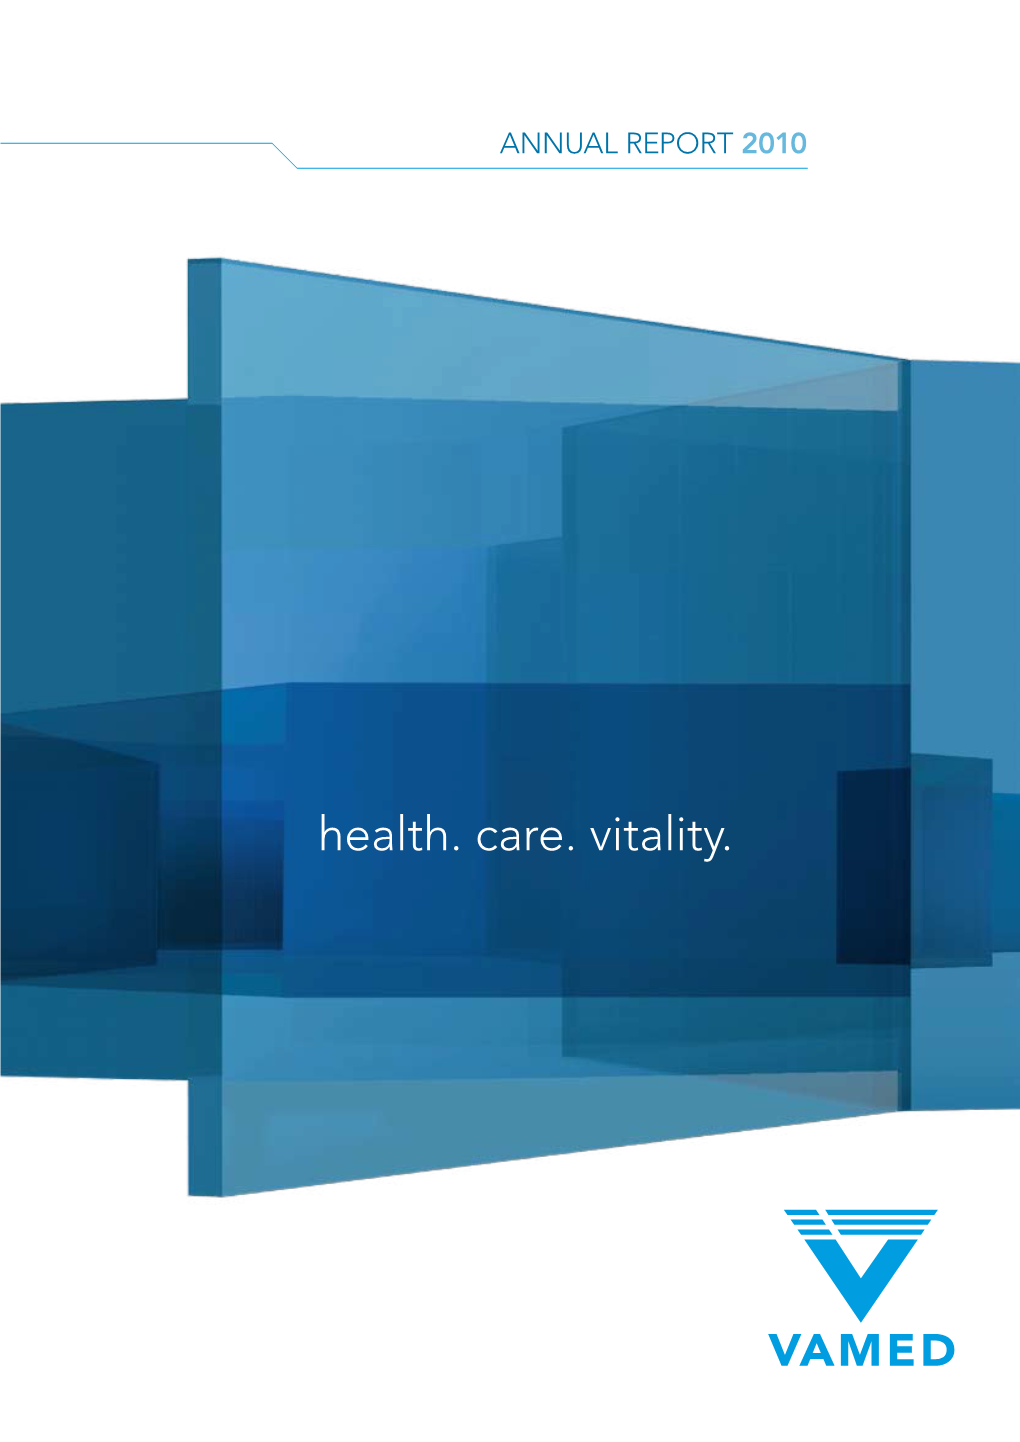 Health. Care. Vitality. Vamed ANNUAL REPORT 2010